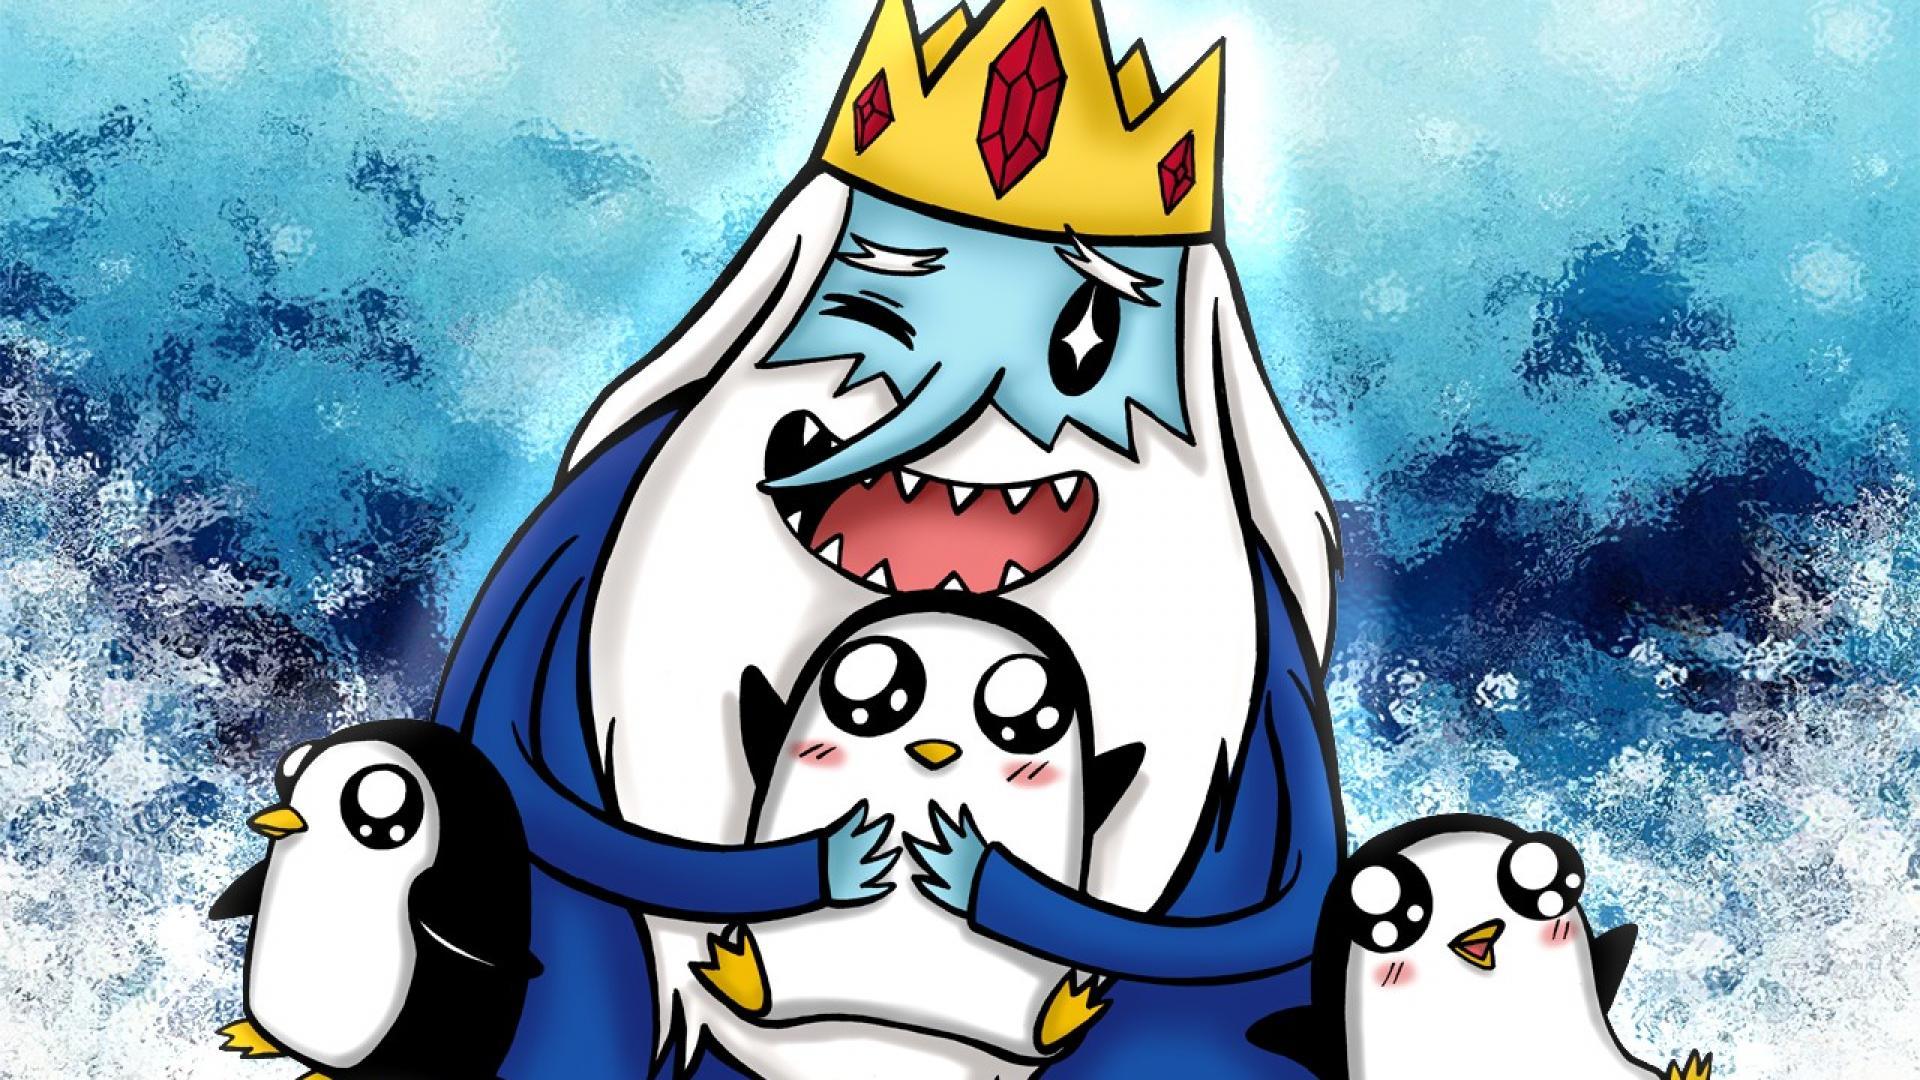 Adventure time with finn and jake ice king wallpapers.